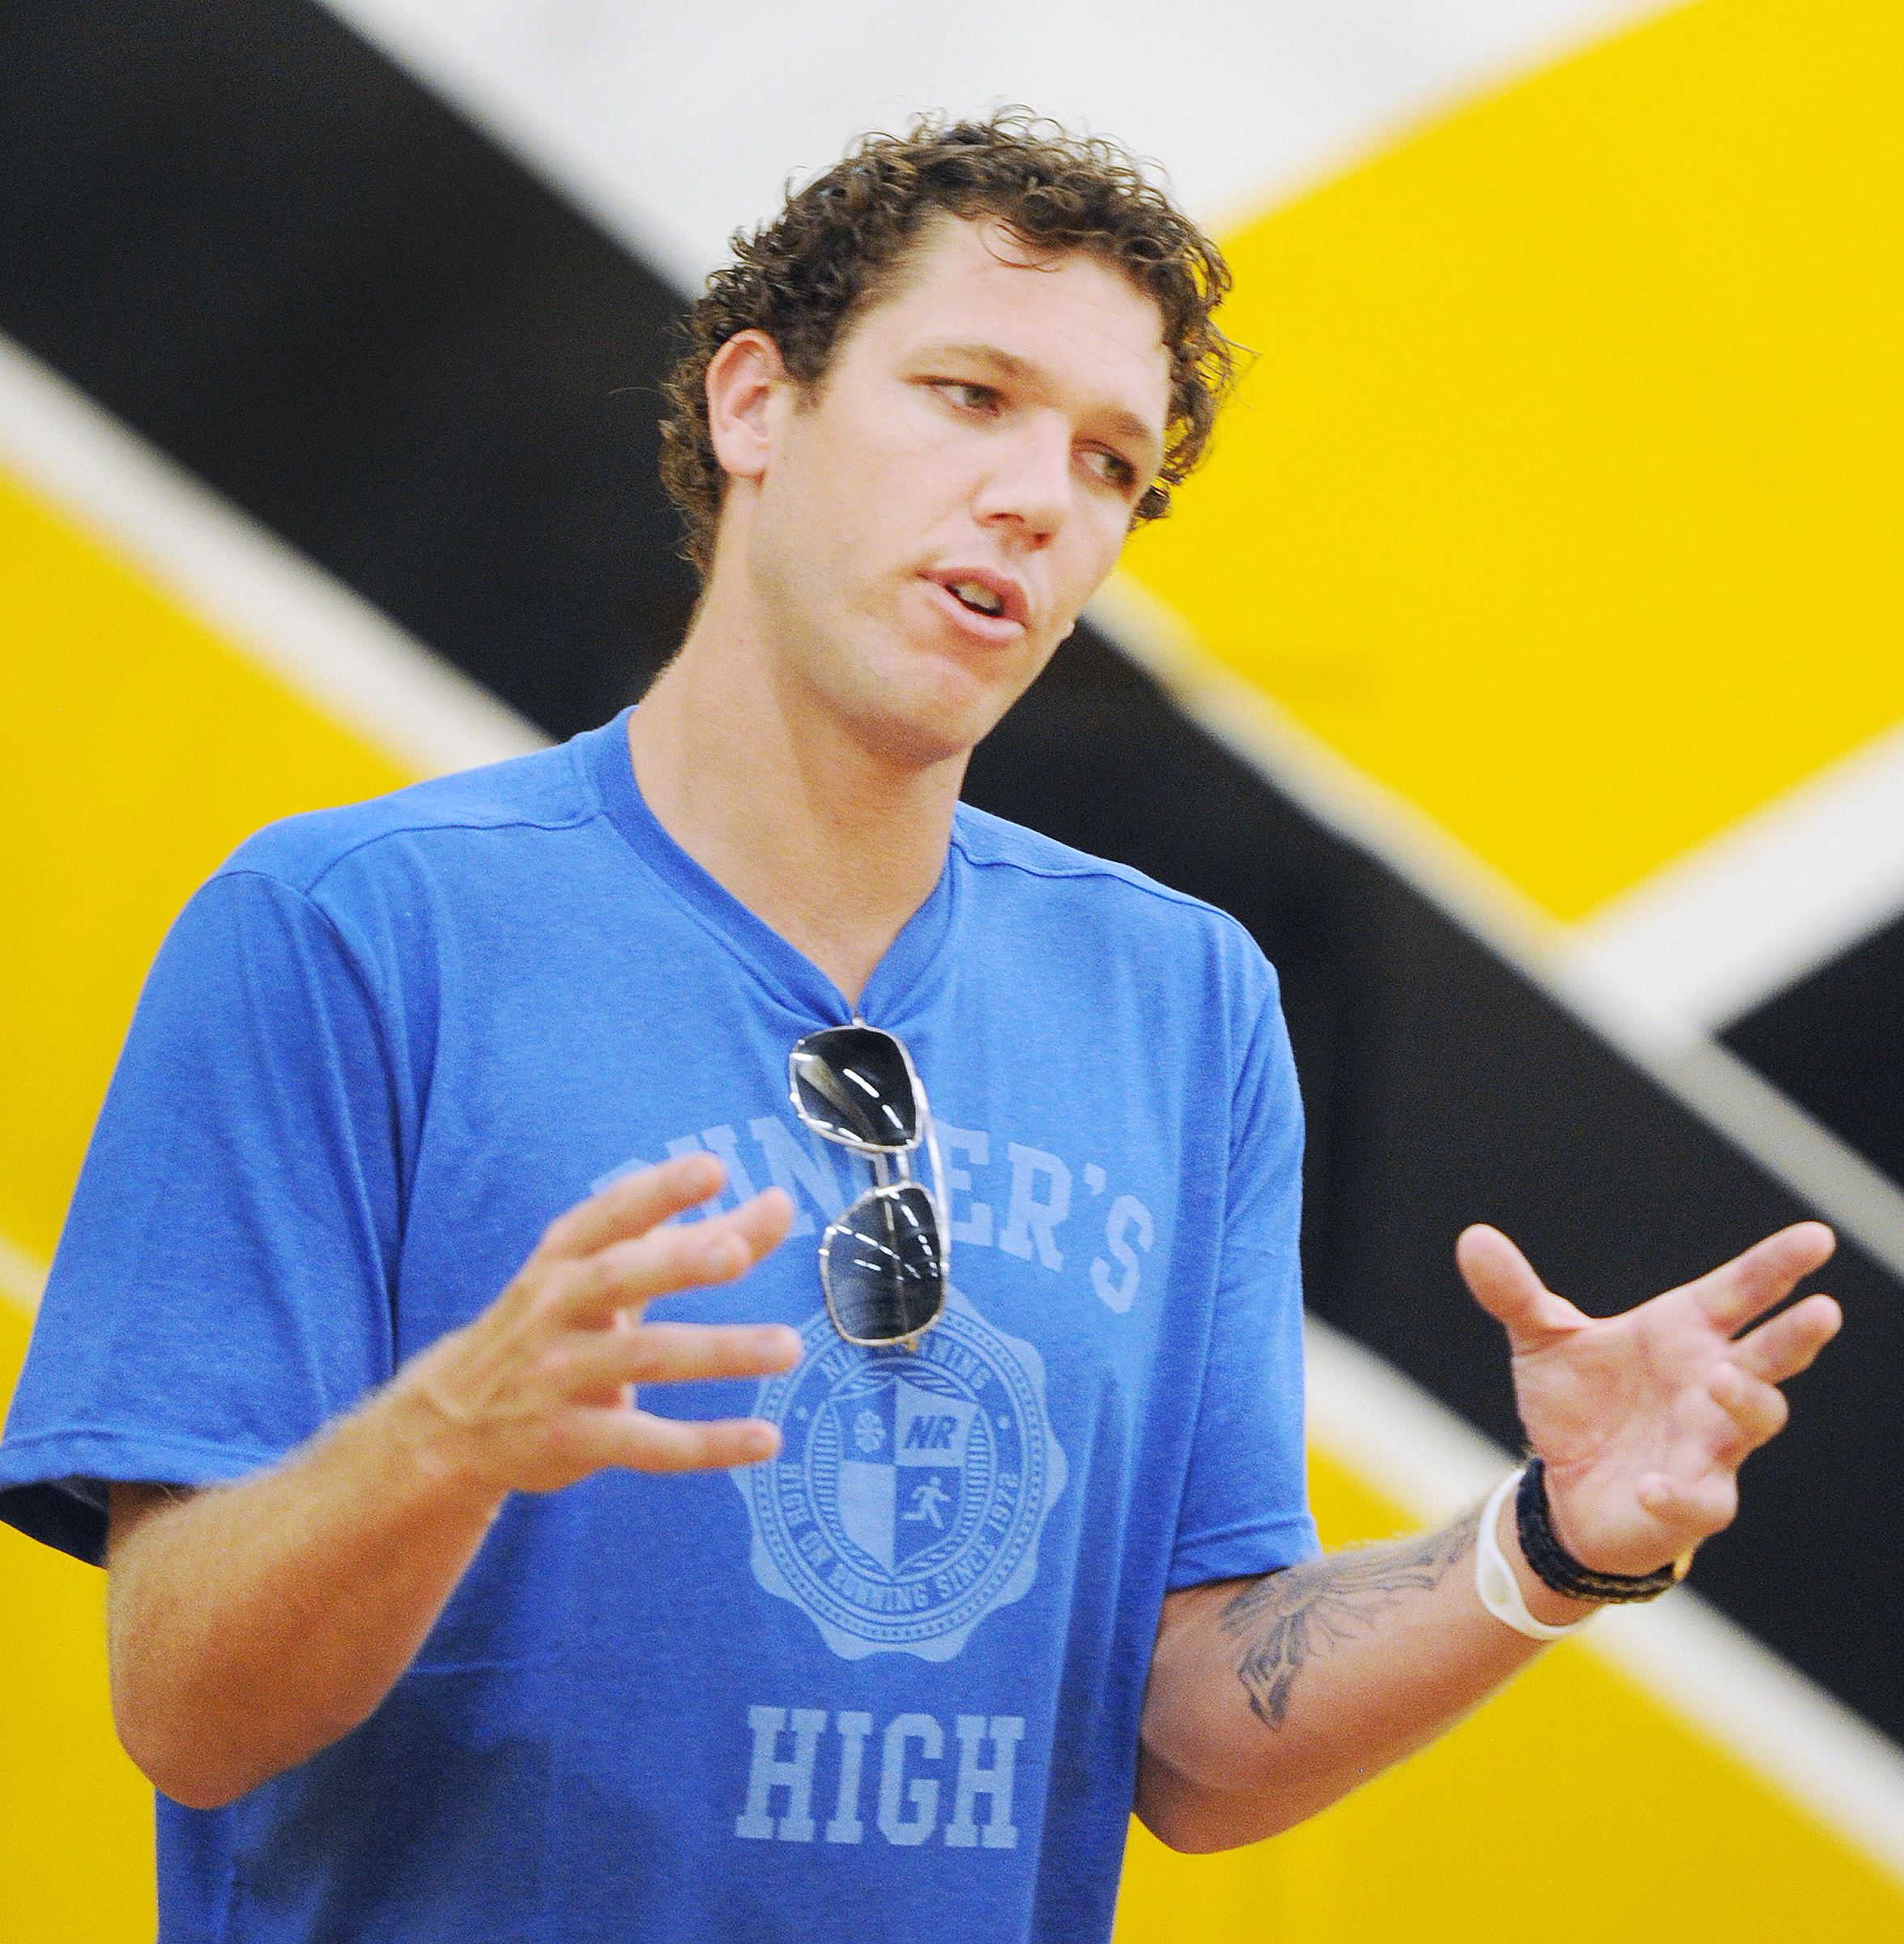 Los Angeles Laker Luke Walton visited Don Bosco Technical Institutes Marco Nunez Basketball Camp that ends today, Thursday, July 28, 2011.  Walton gave an inspiring discussing on basketball, education and motivated players in the basketball camp to strive to achieve their best and gave examples from his youth and how he has achieve his success.(SGVNStaff Photo by Walt Mancini/SXCity)